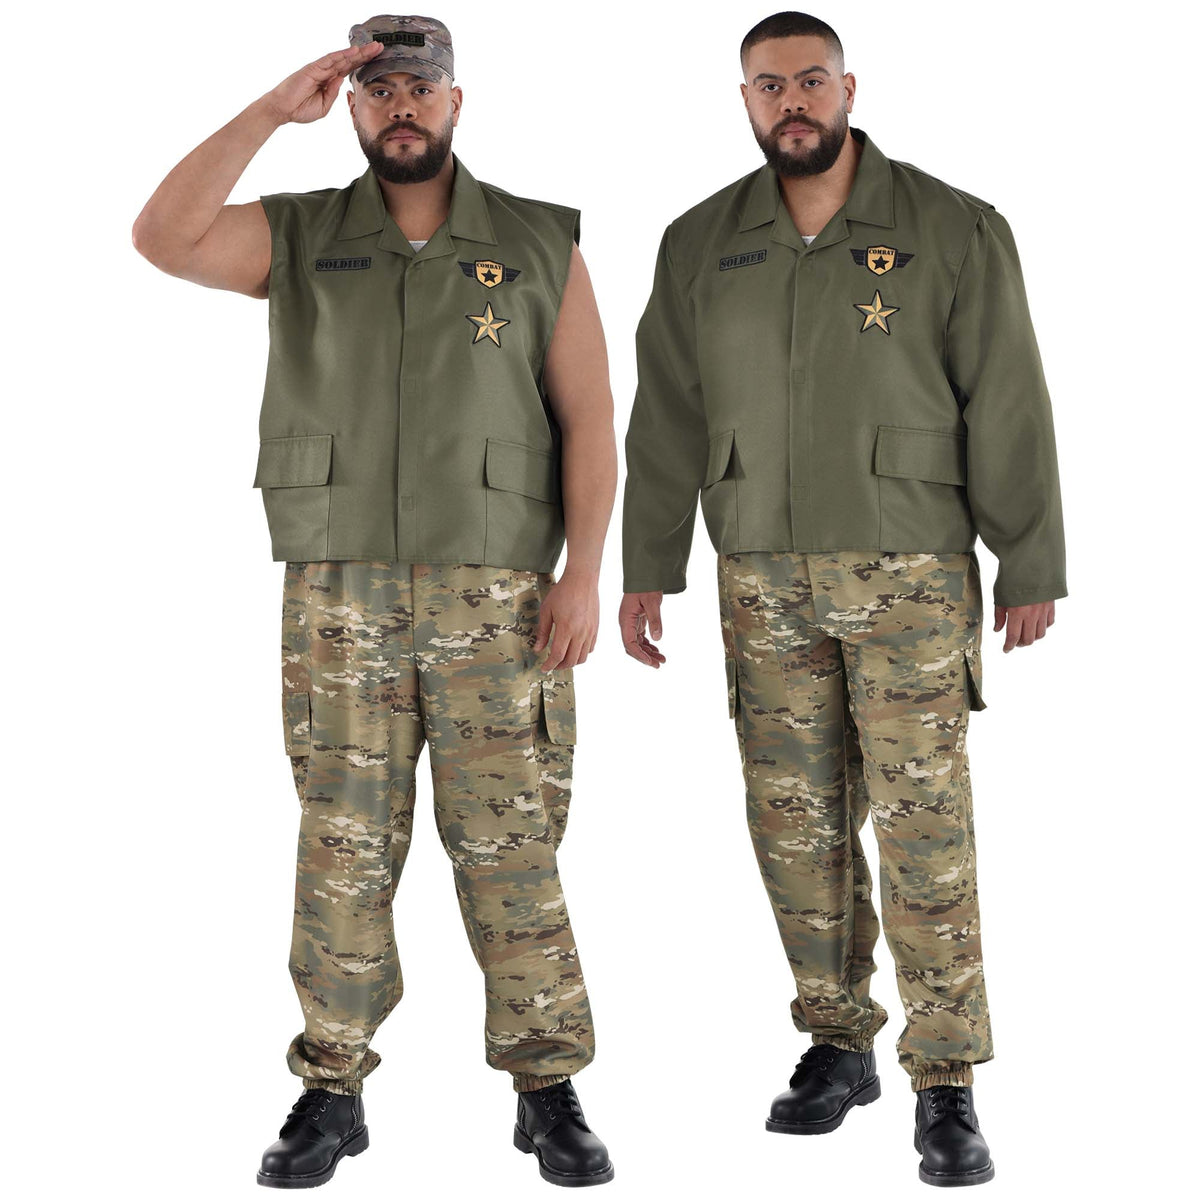 HALLOWEEN COSTUME CO. Costumes Soldier Costume for Plus Size Adults, Green Jacket and Pants